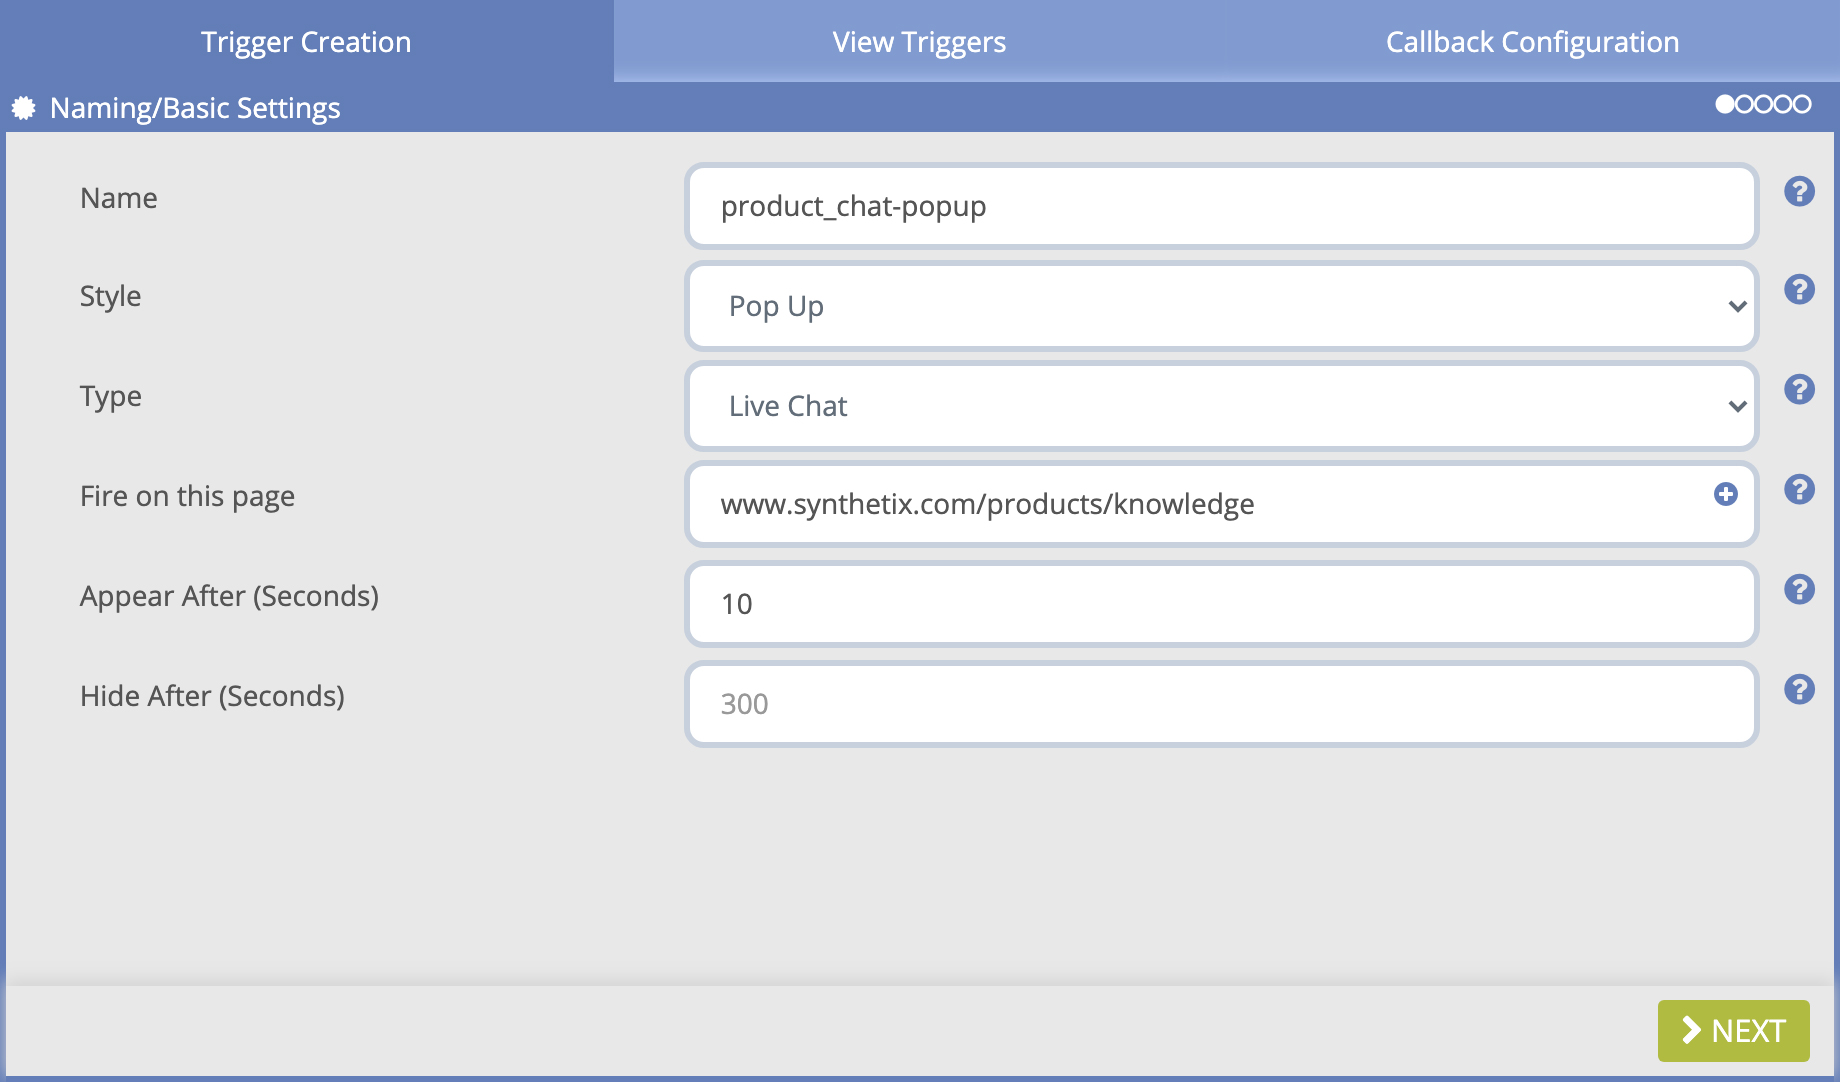 An image to demonstrate trigger management within live chat software.